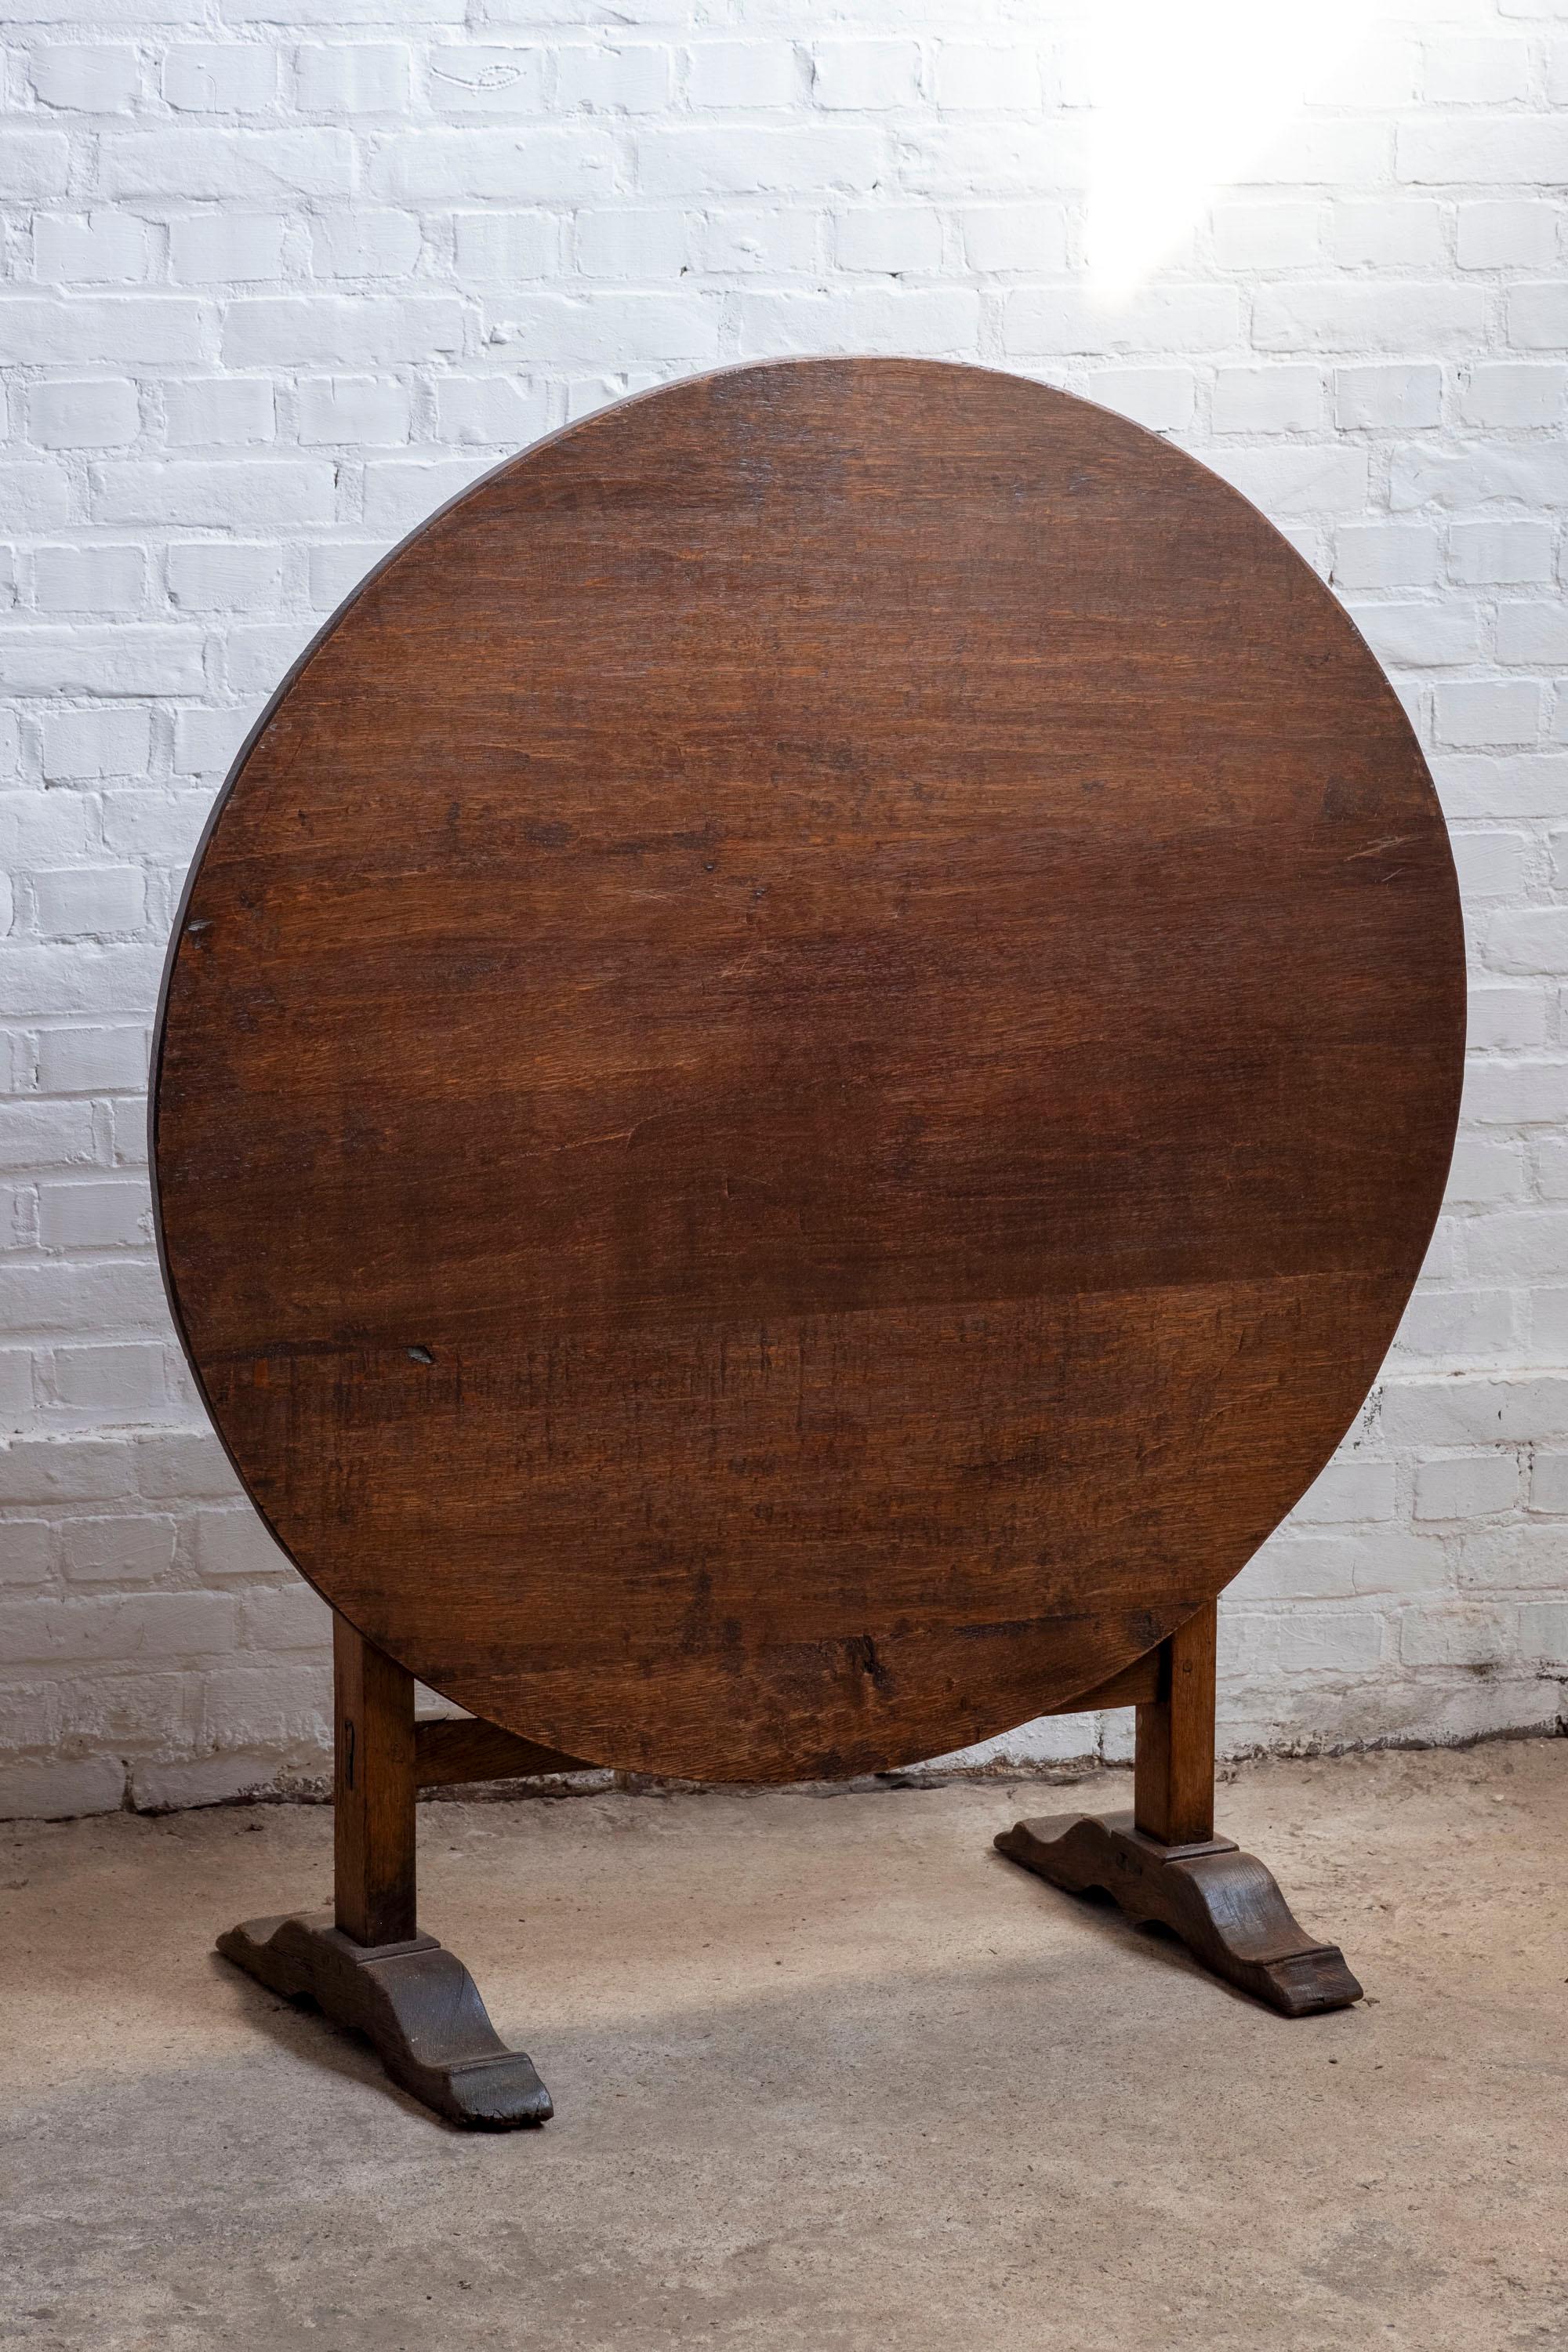 Wonderful example of a French vigneron or wine tasting table with a hand-card table top. The top is completely carved and has an amazing texture, rarely seen quality.

Wear consistent with age and use, mainly in the form of light scratches.